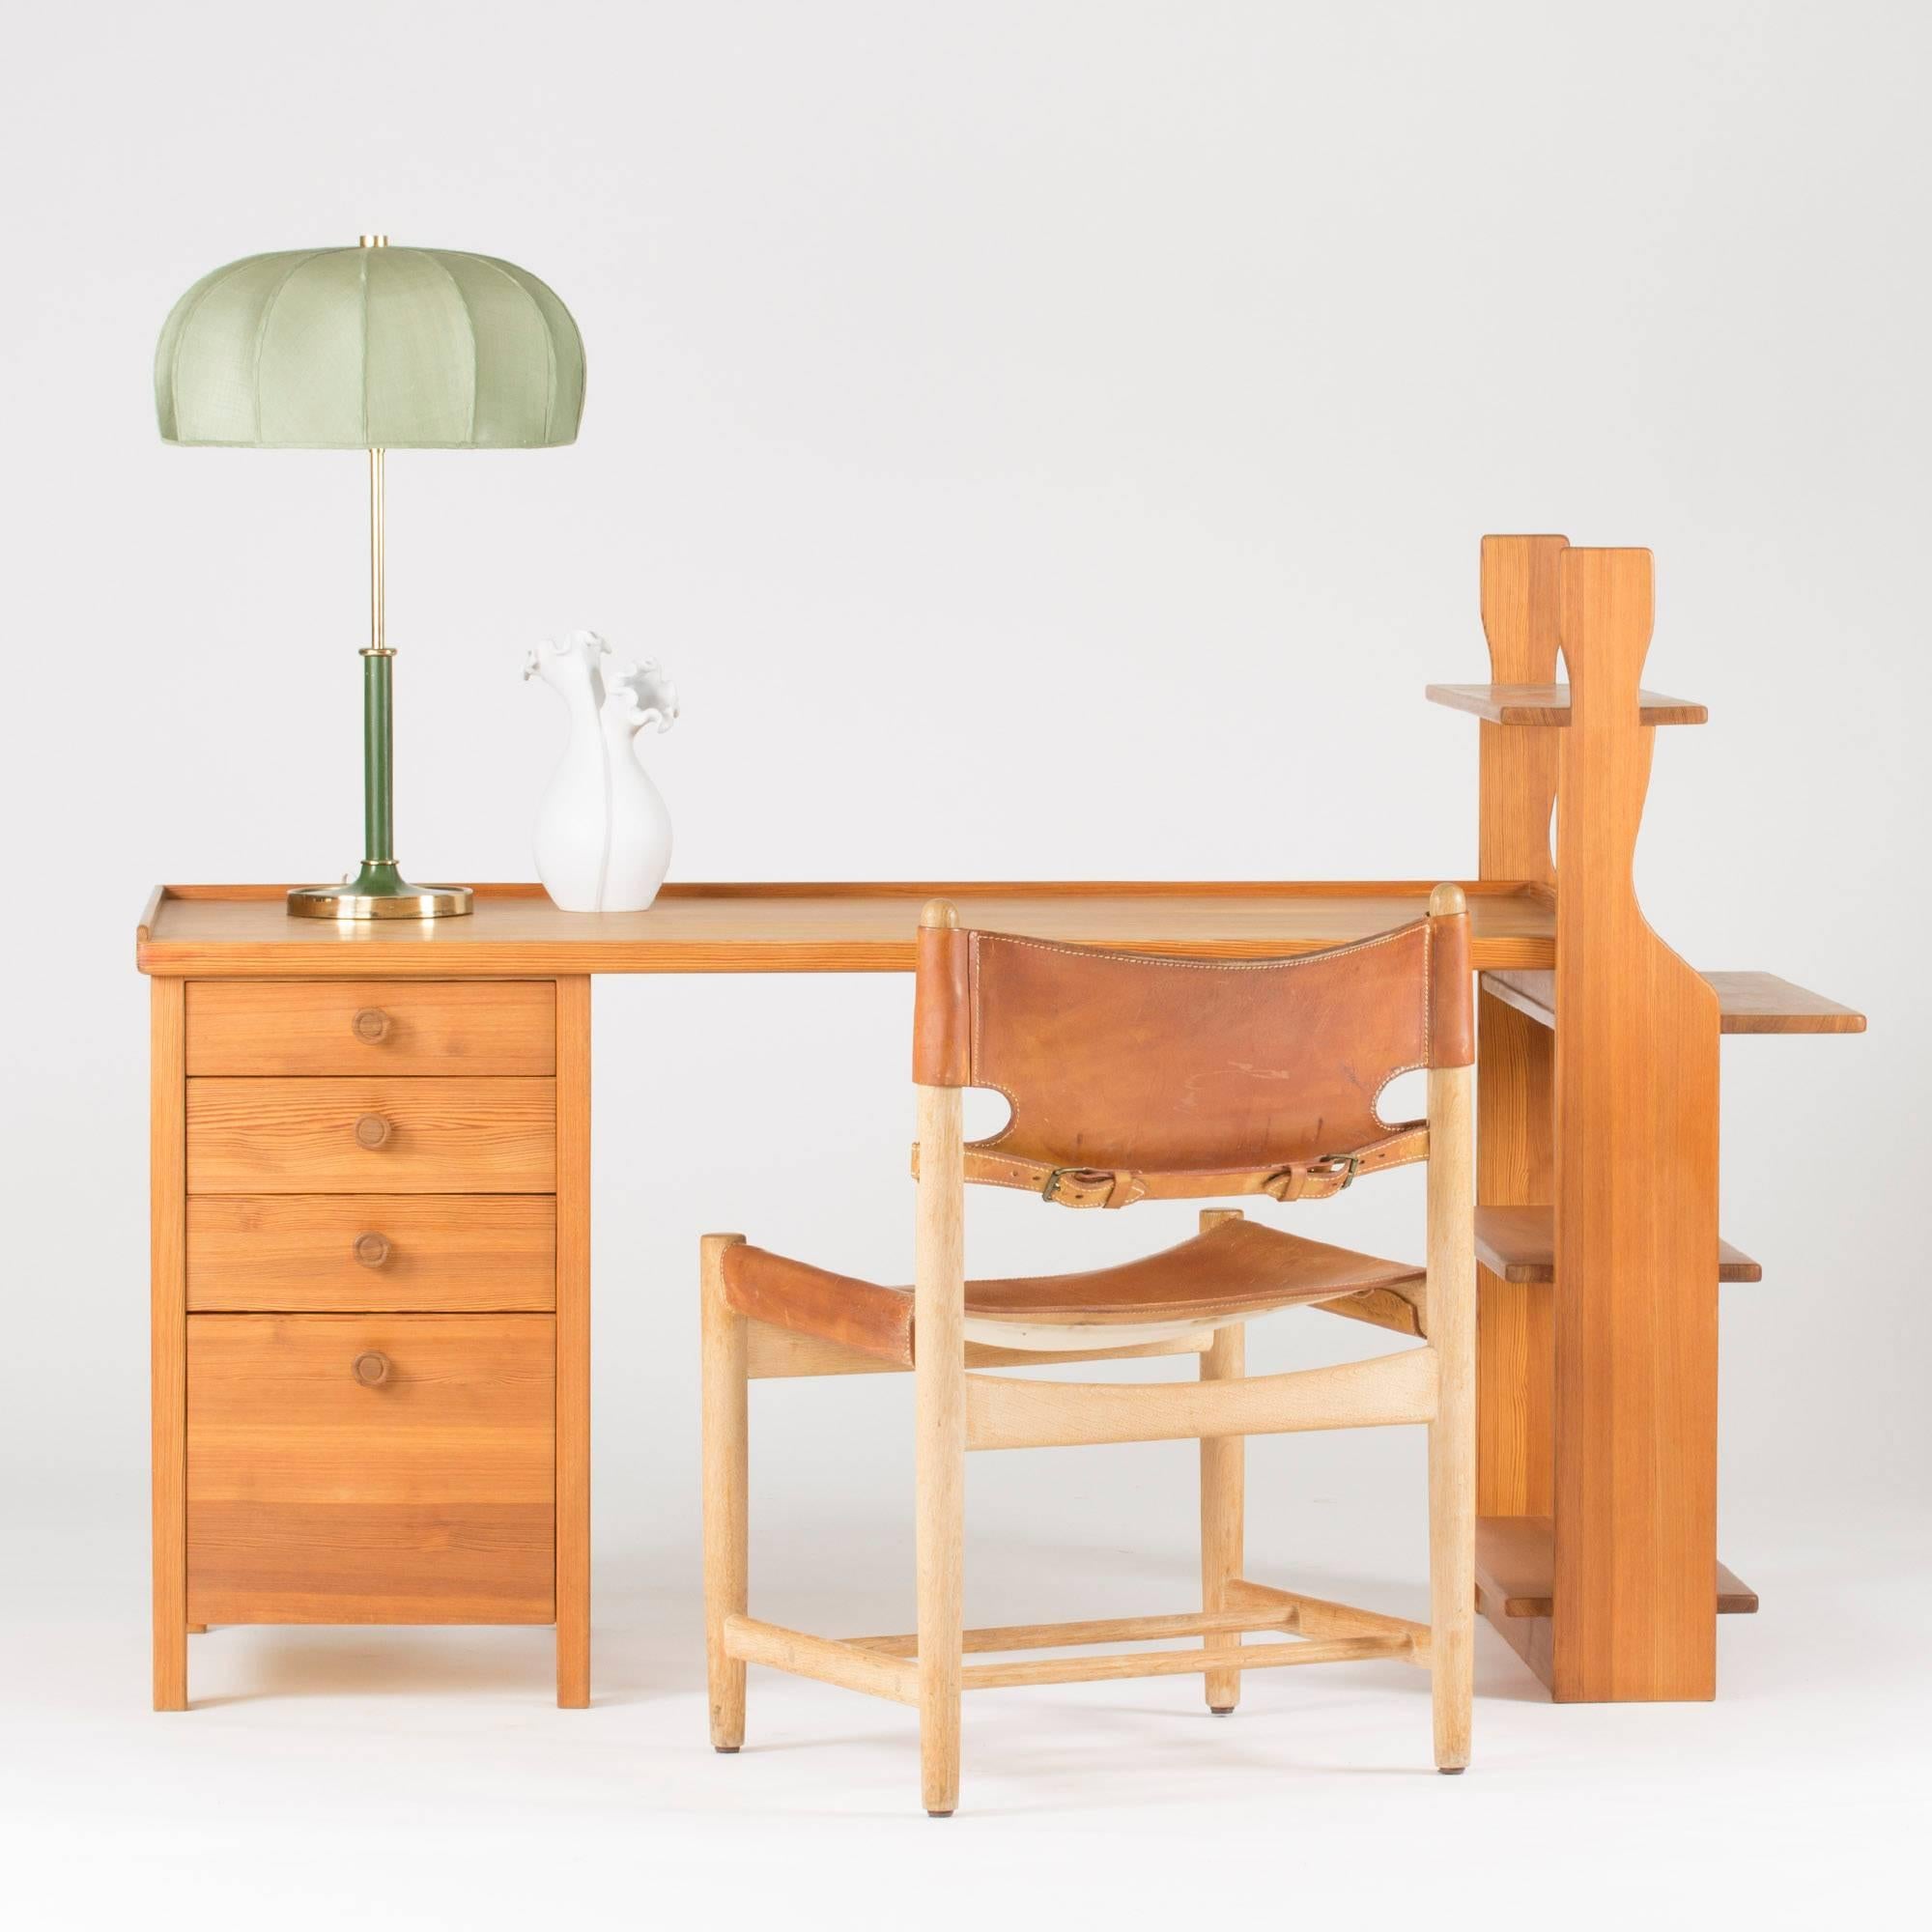 Rare pine desk, made by Carl Malmsten in the late 1930s. The desk is made from three separable modules; drawers, tabletop and shelves. Shelf sides made in a rustic, sculptural design. The tabletop is bordered on three sides by a slightly elevated